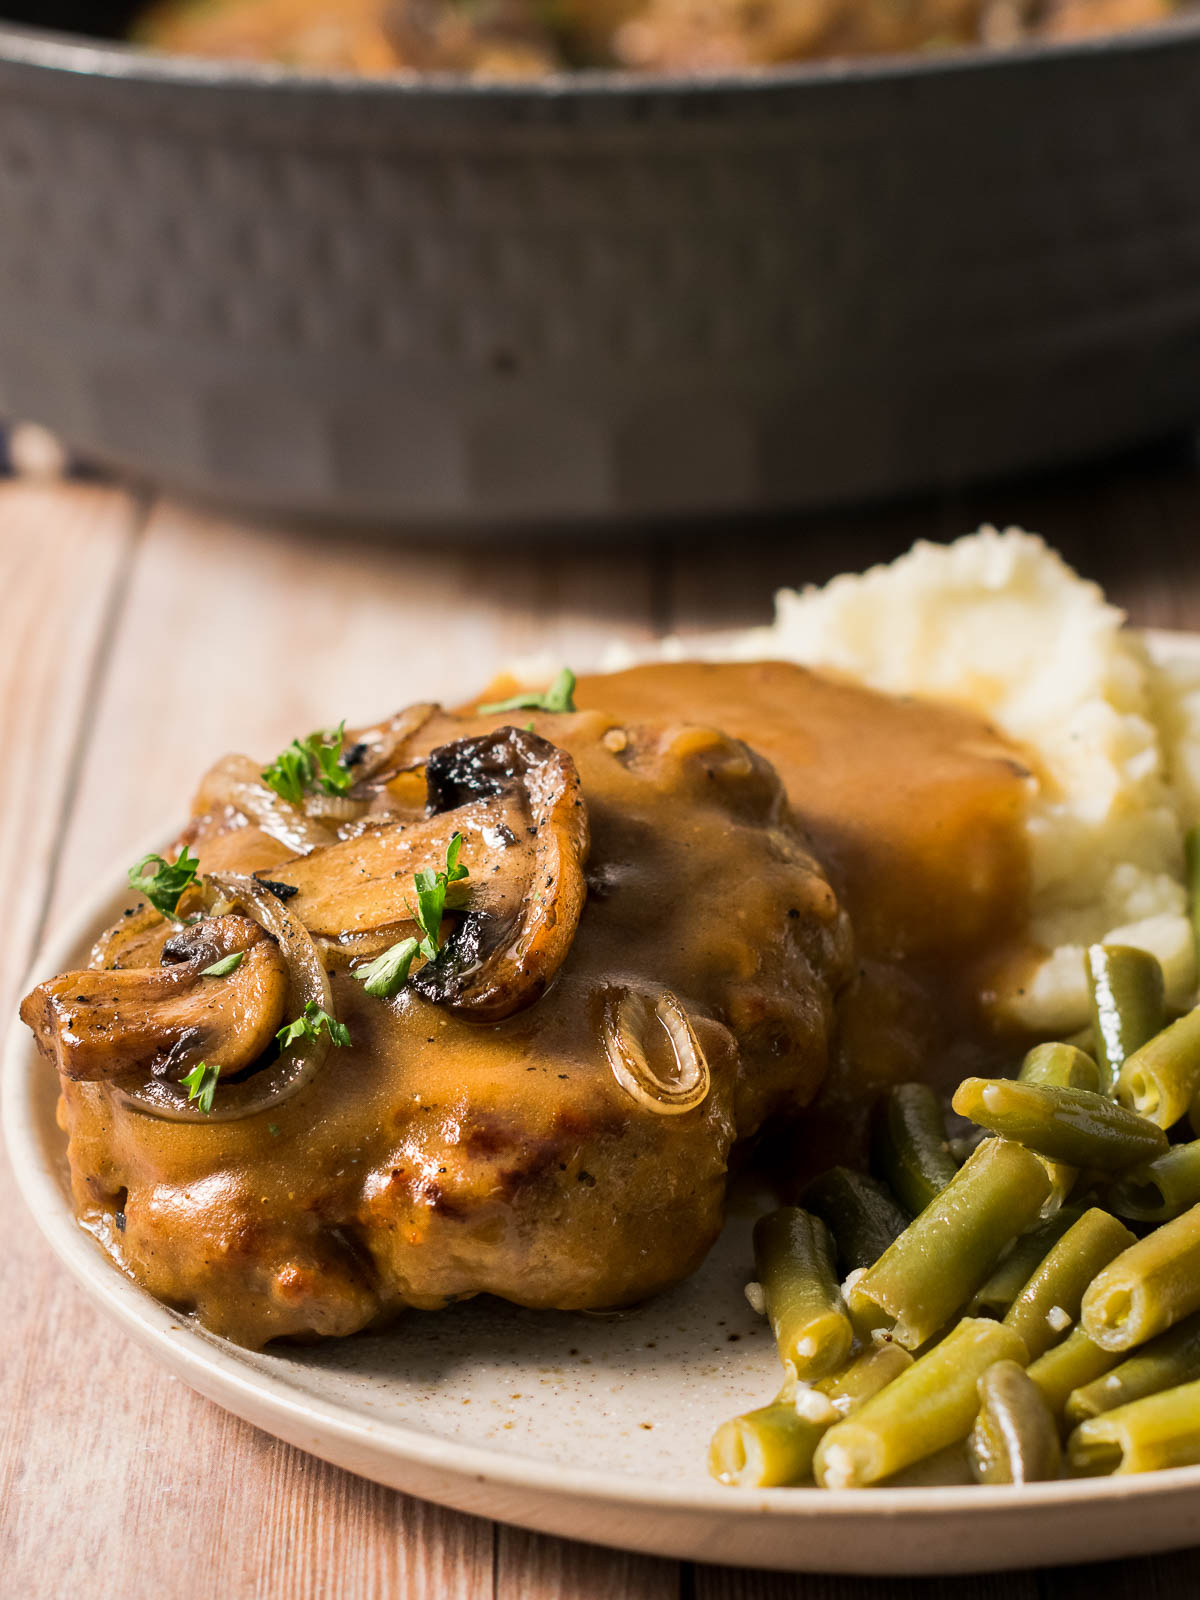 Chopped steak and gravy on mashed potatoes served on a plate with green beans.